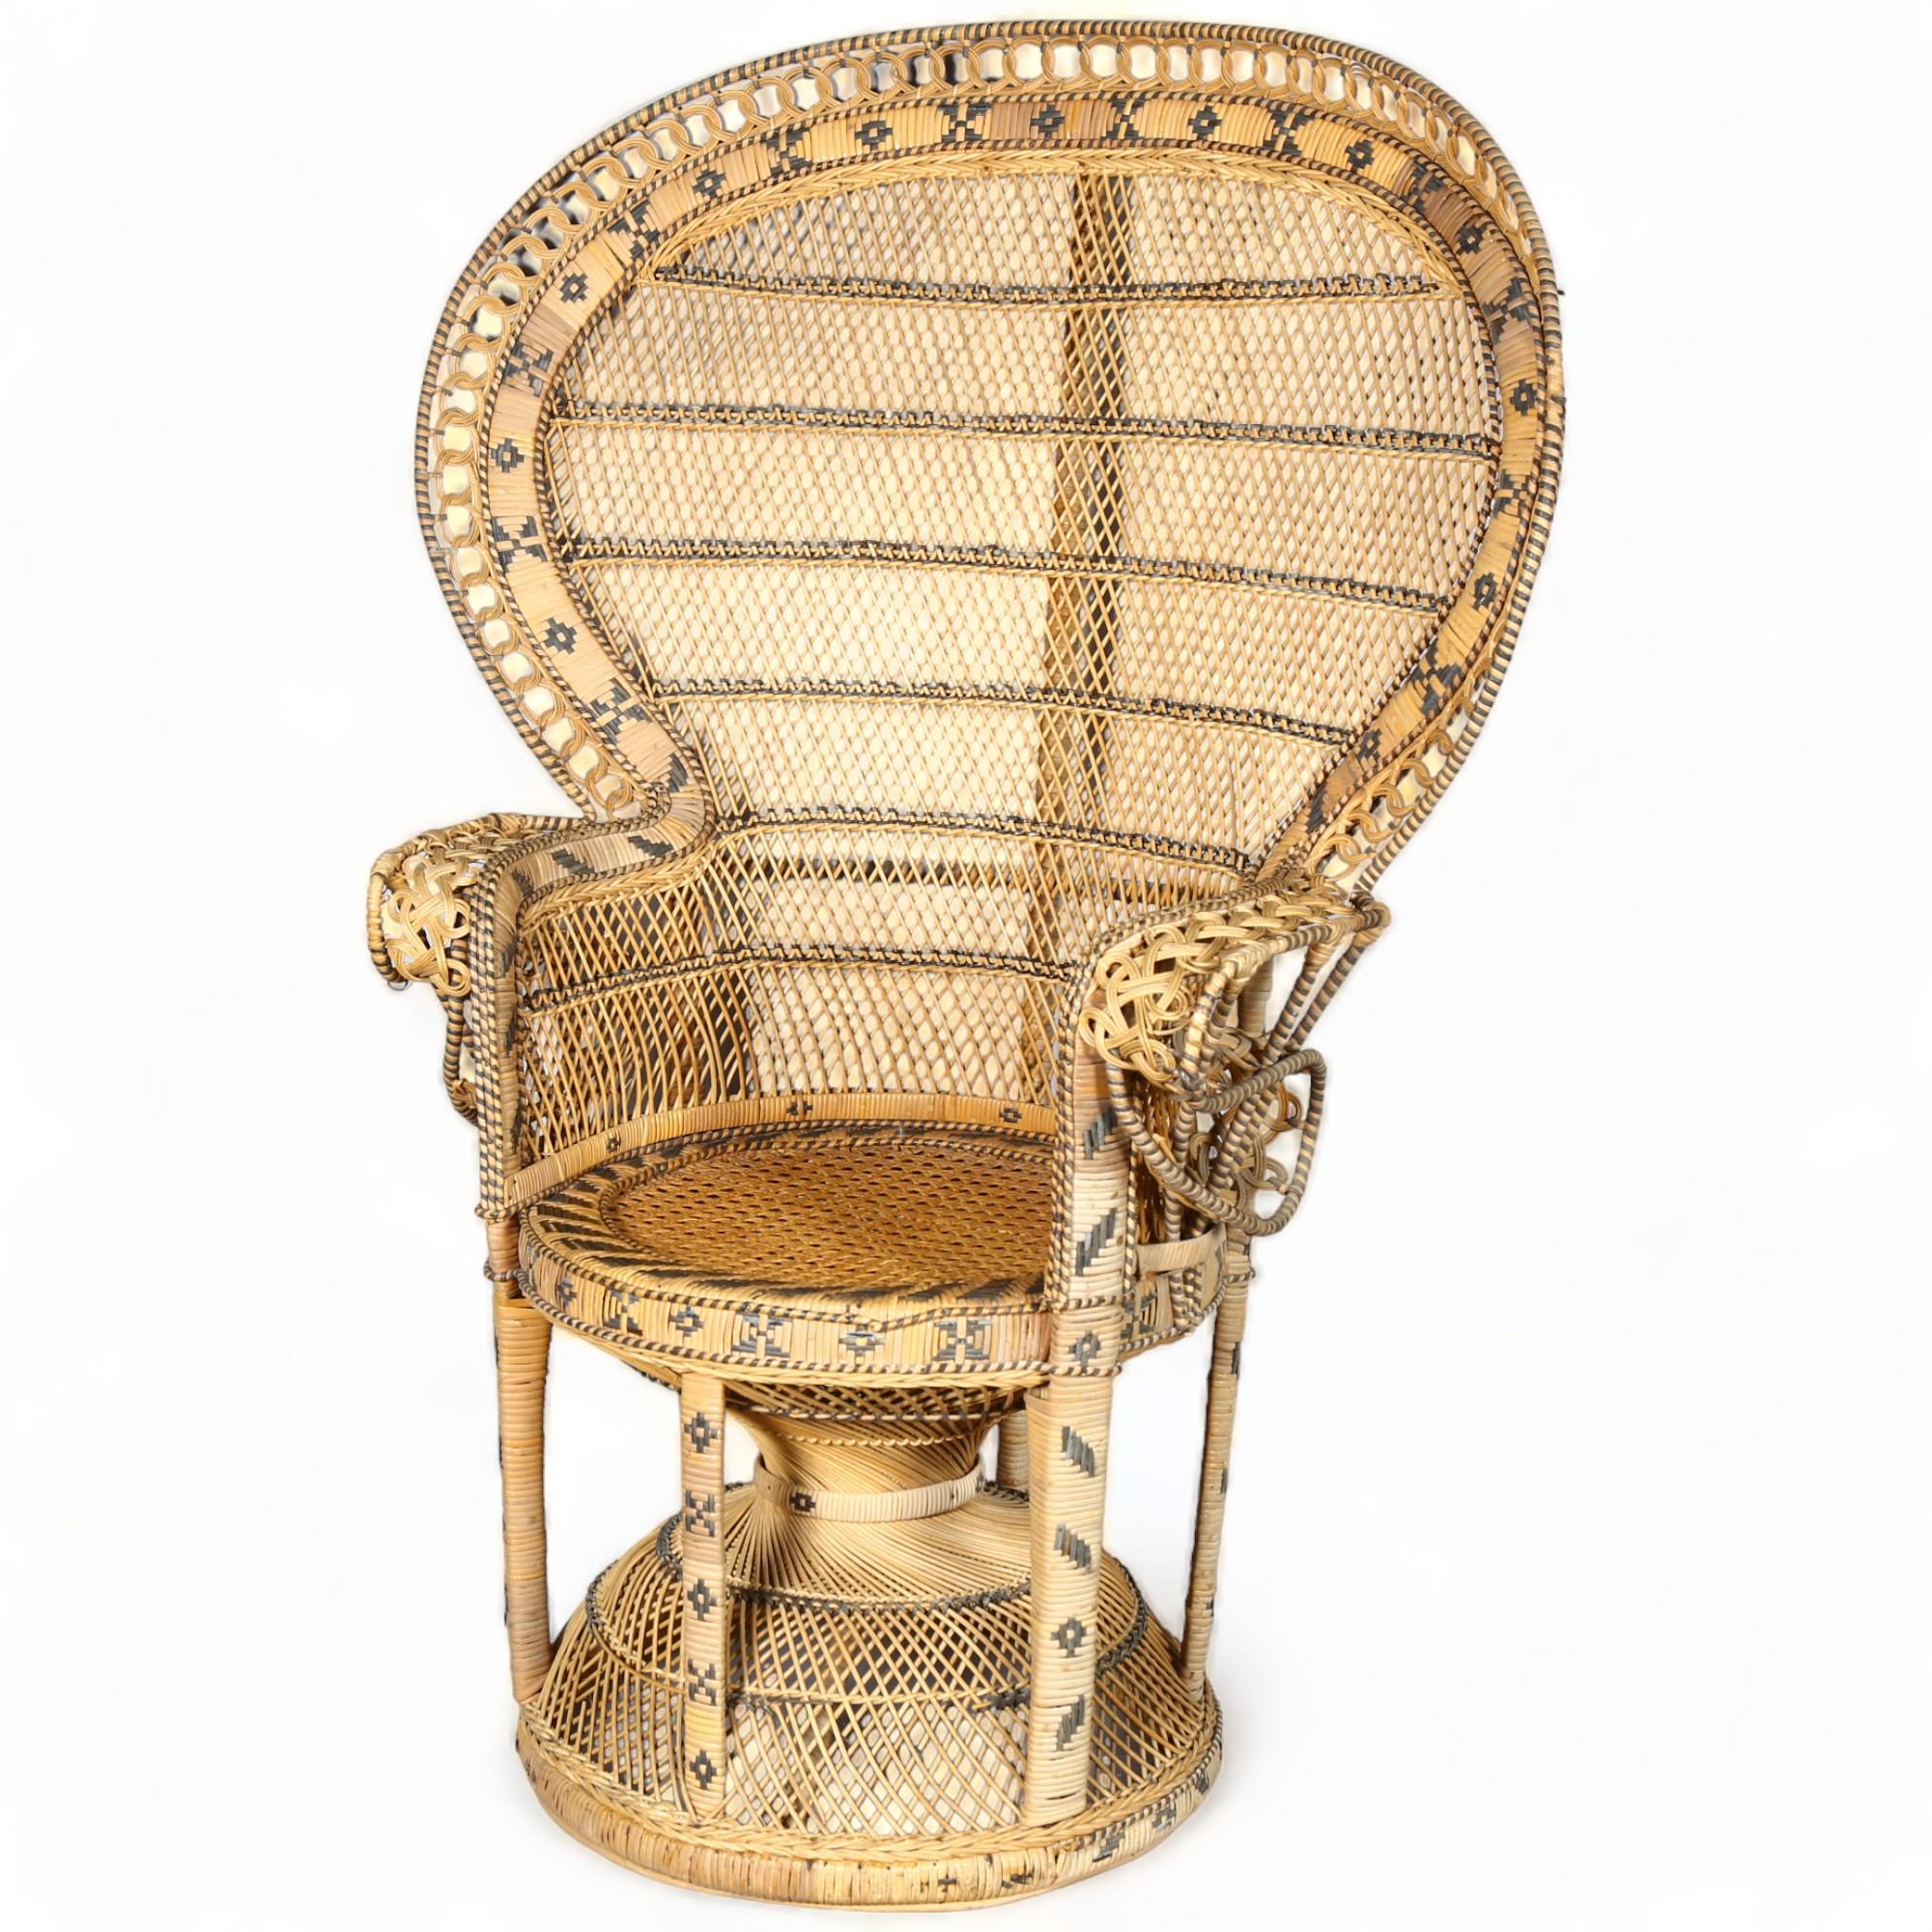 A 1960s/70s rattan Peacock chair, height 136cm The rattan has faded and the outer edge of both